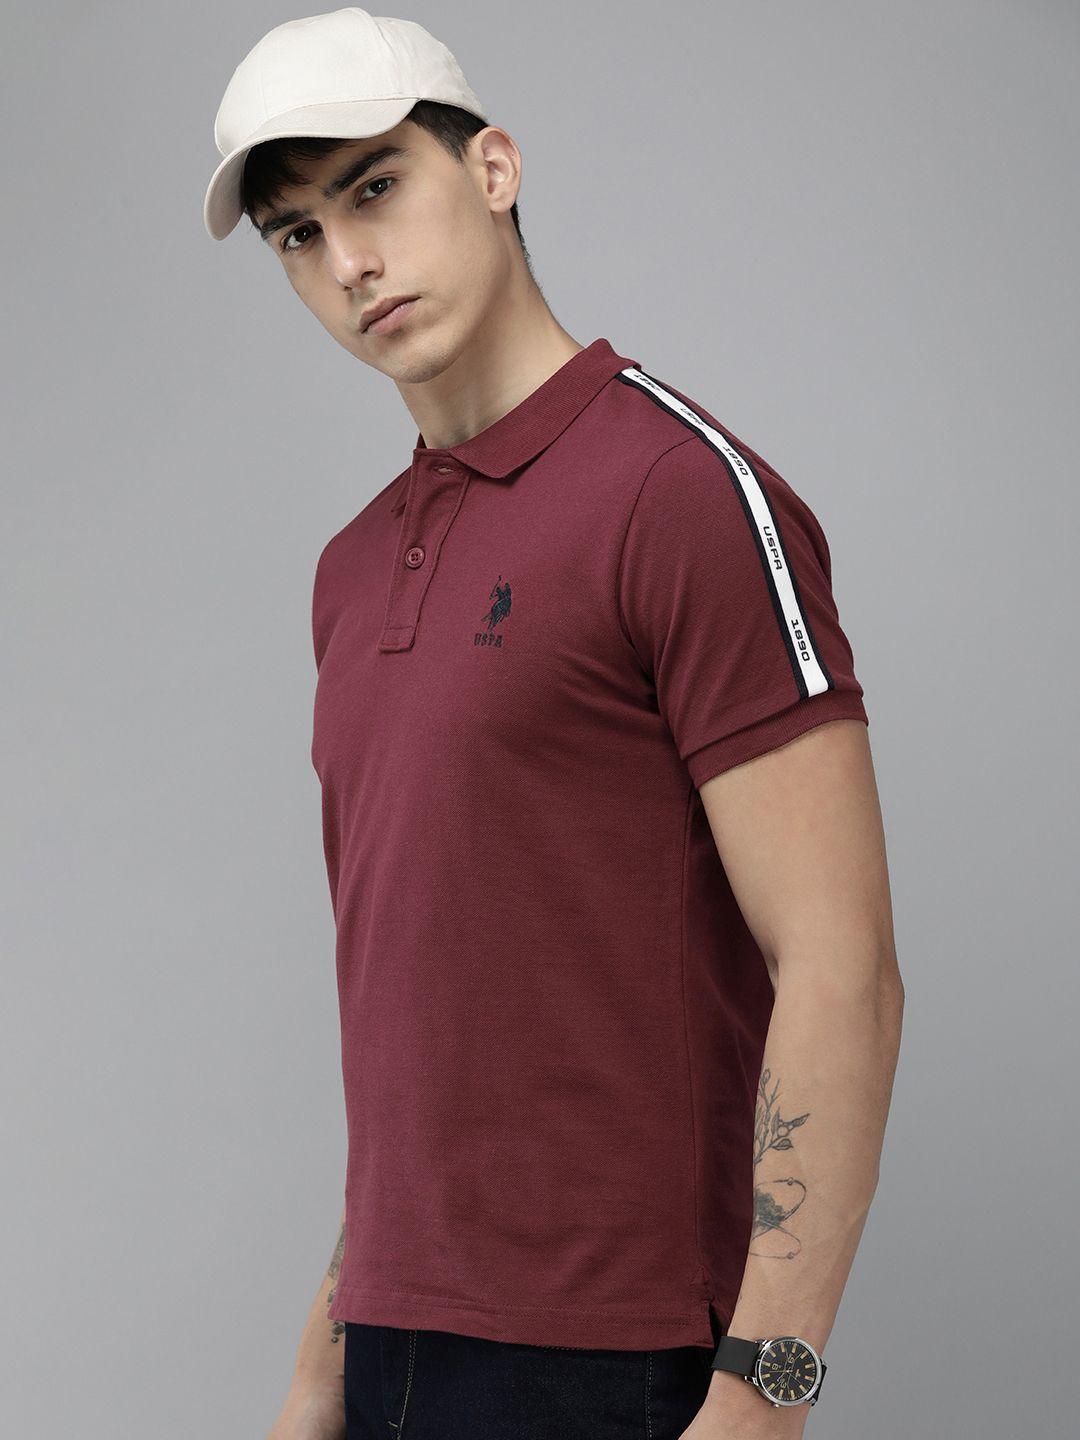 u.s. polo assn. brand logo embroidered polo collar pure cotton slim fit t-shirt